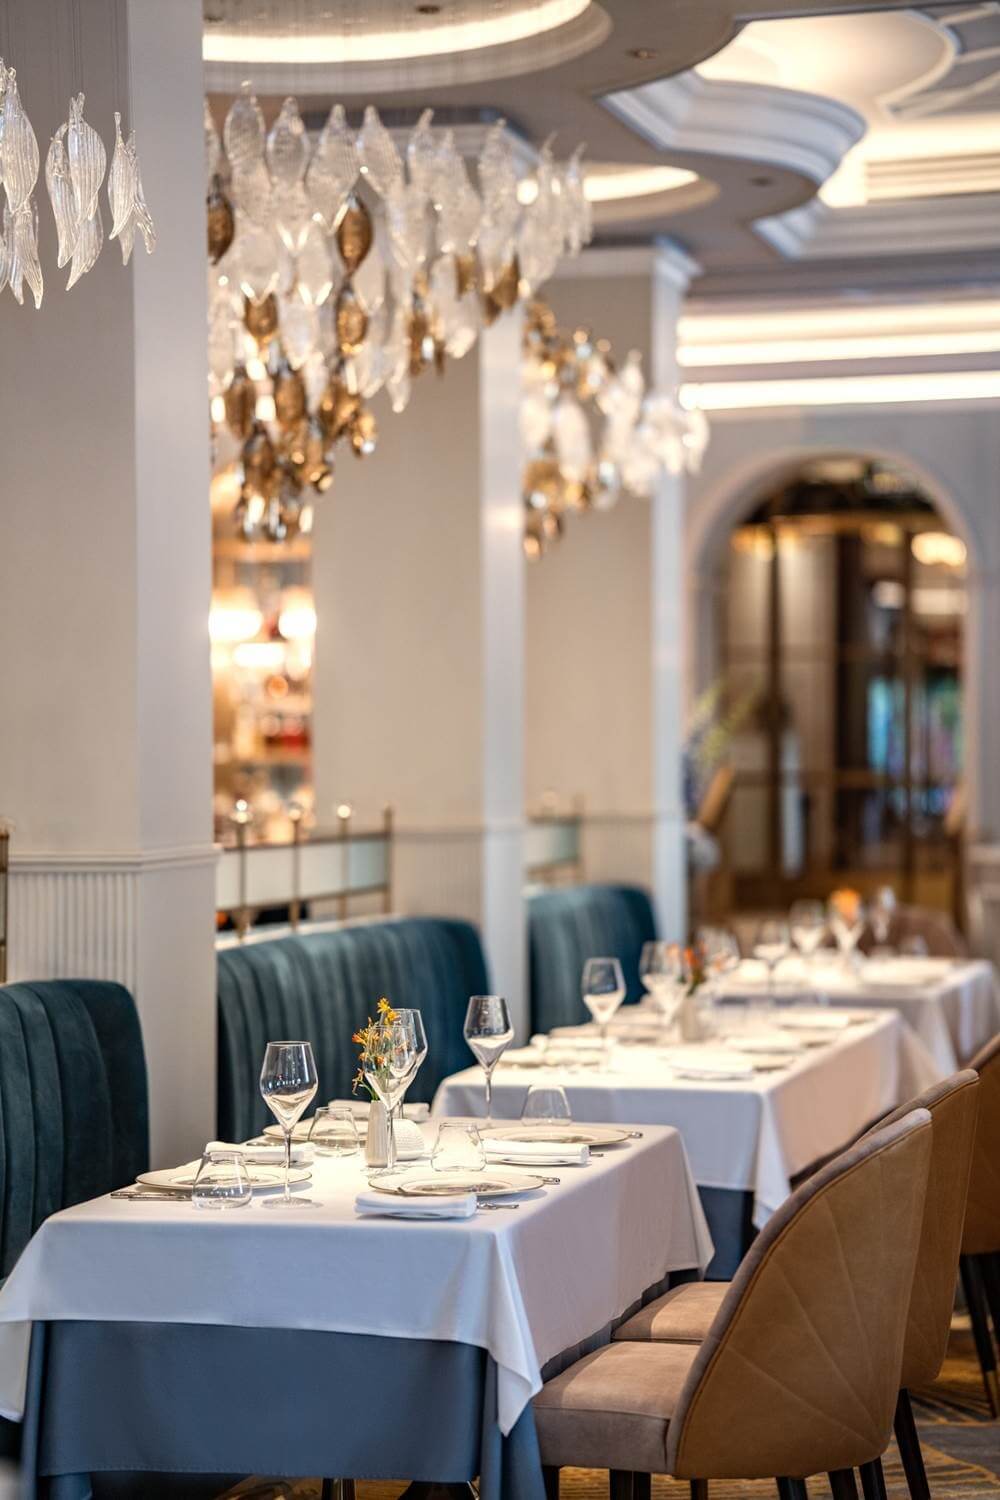 Le Beaulieu features an elegant and sophisticated new design, alongside renowned French gastronomy and a wide selection of wines